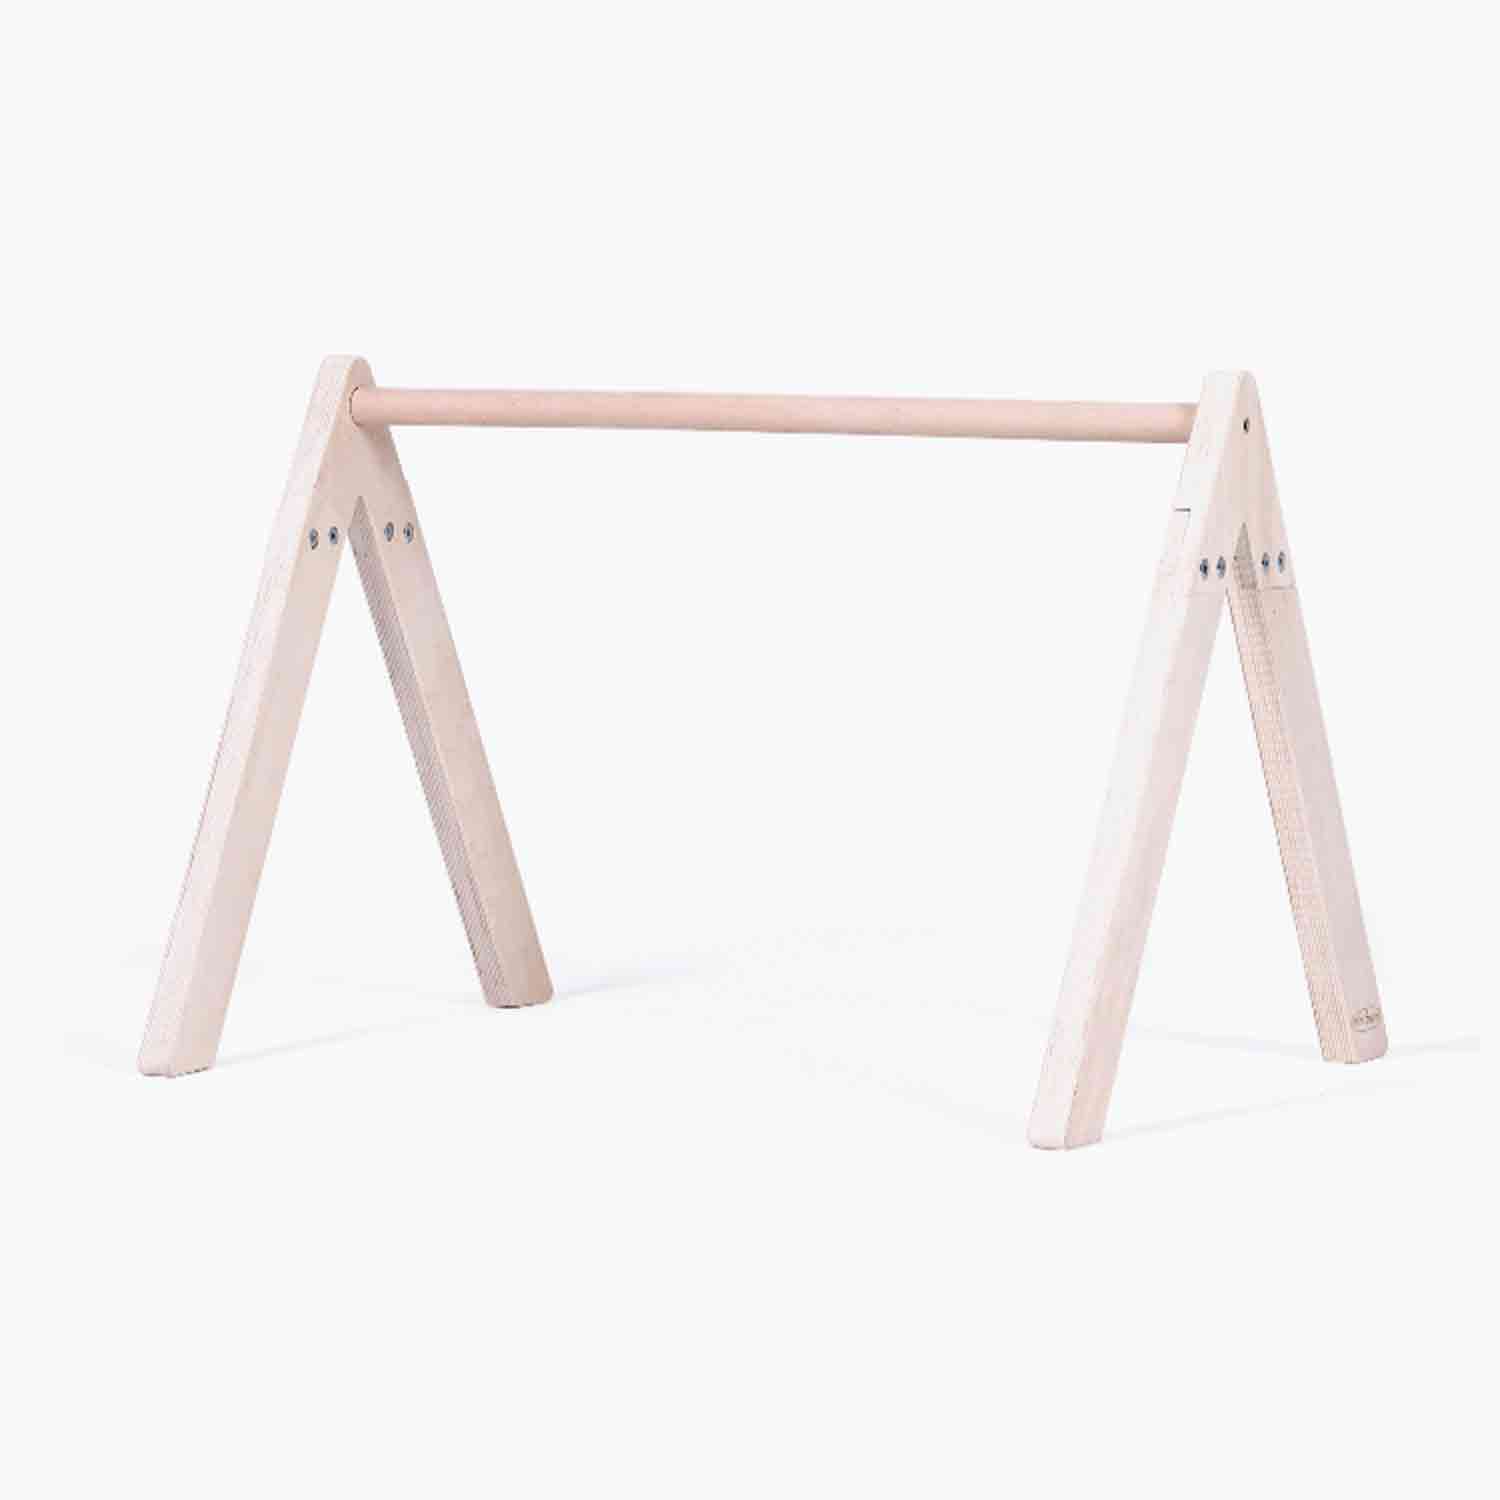 An image of MiniDream Play Gym Wooden Activity Gym Frame